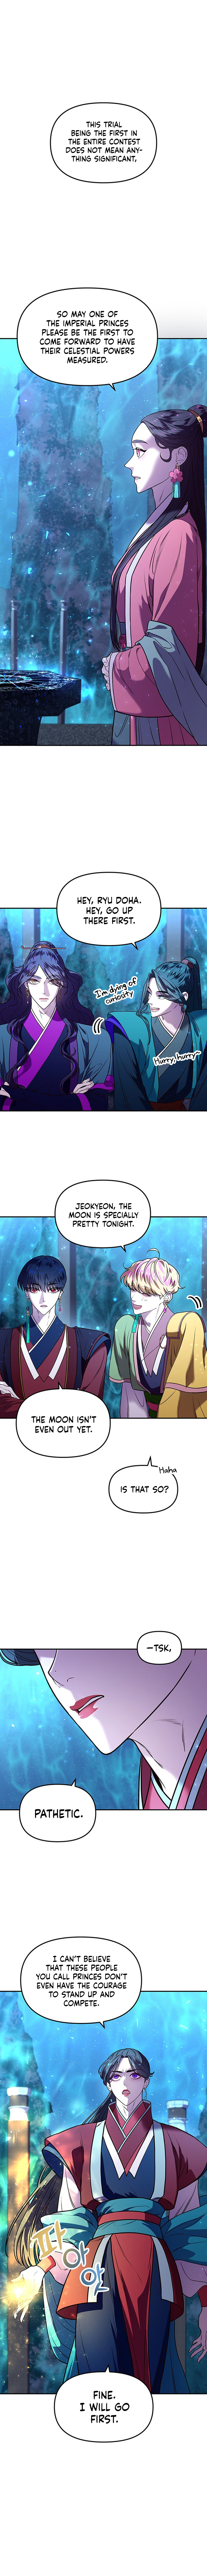 The Prince Of Myeolyeong - Page 1